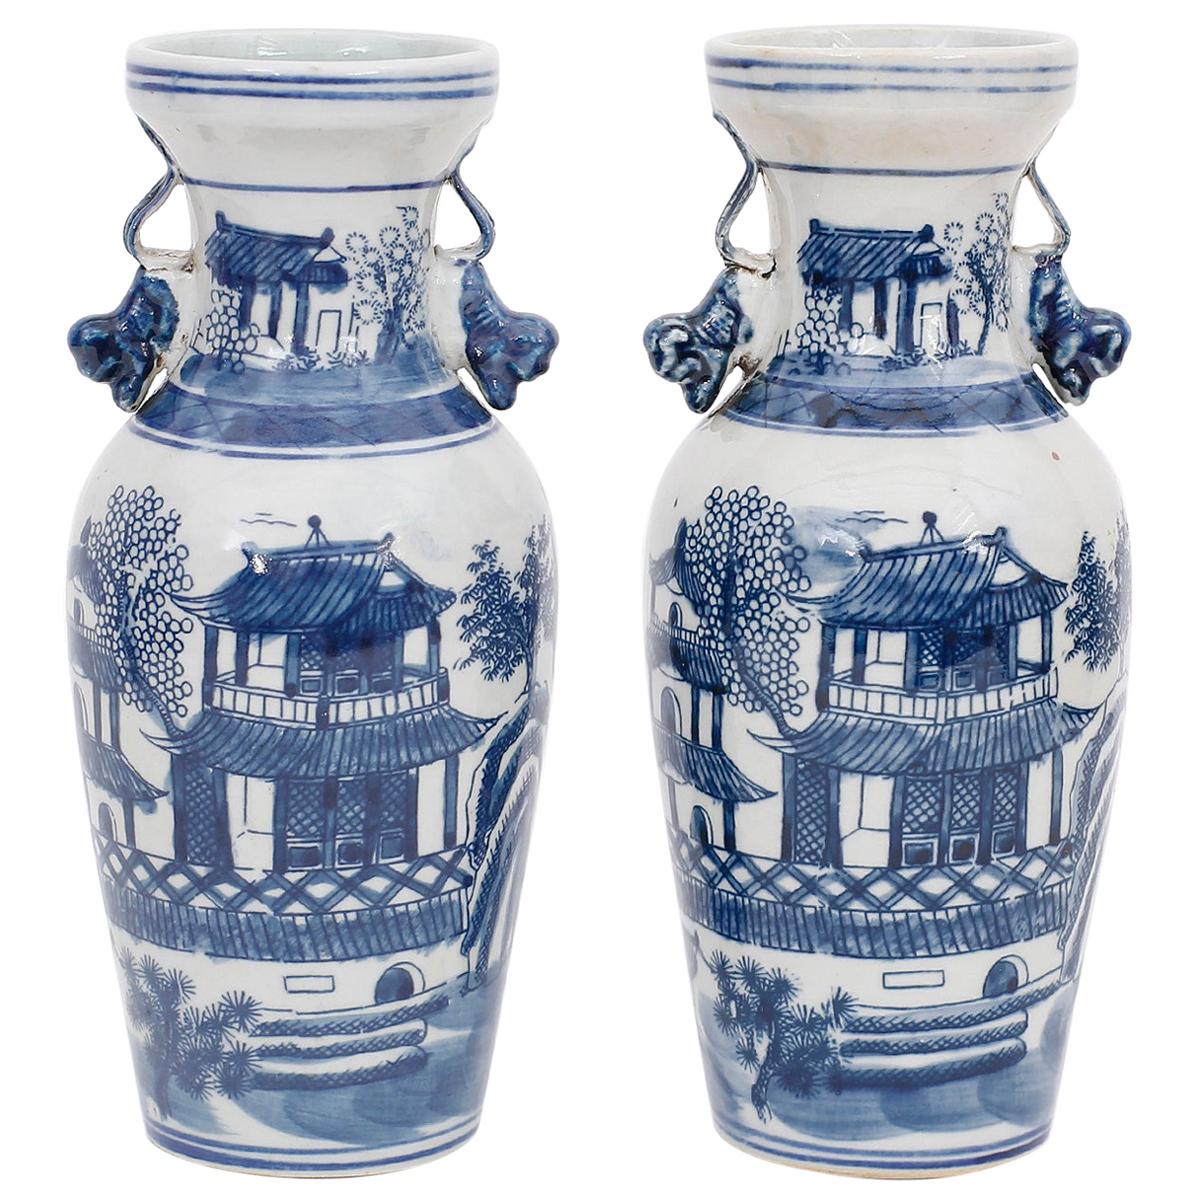 Pair of Blue and White Porcelain Vases with Pagodas